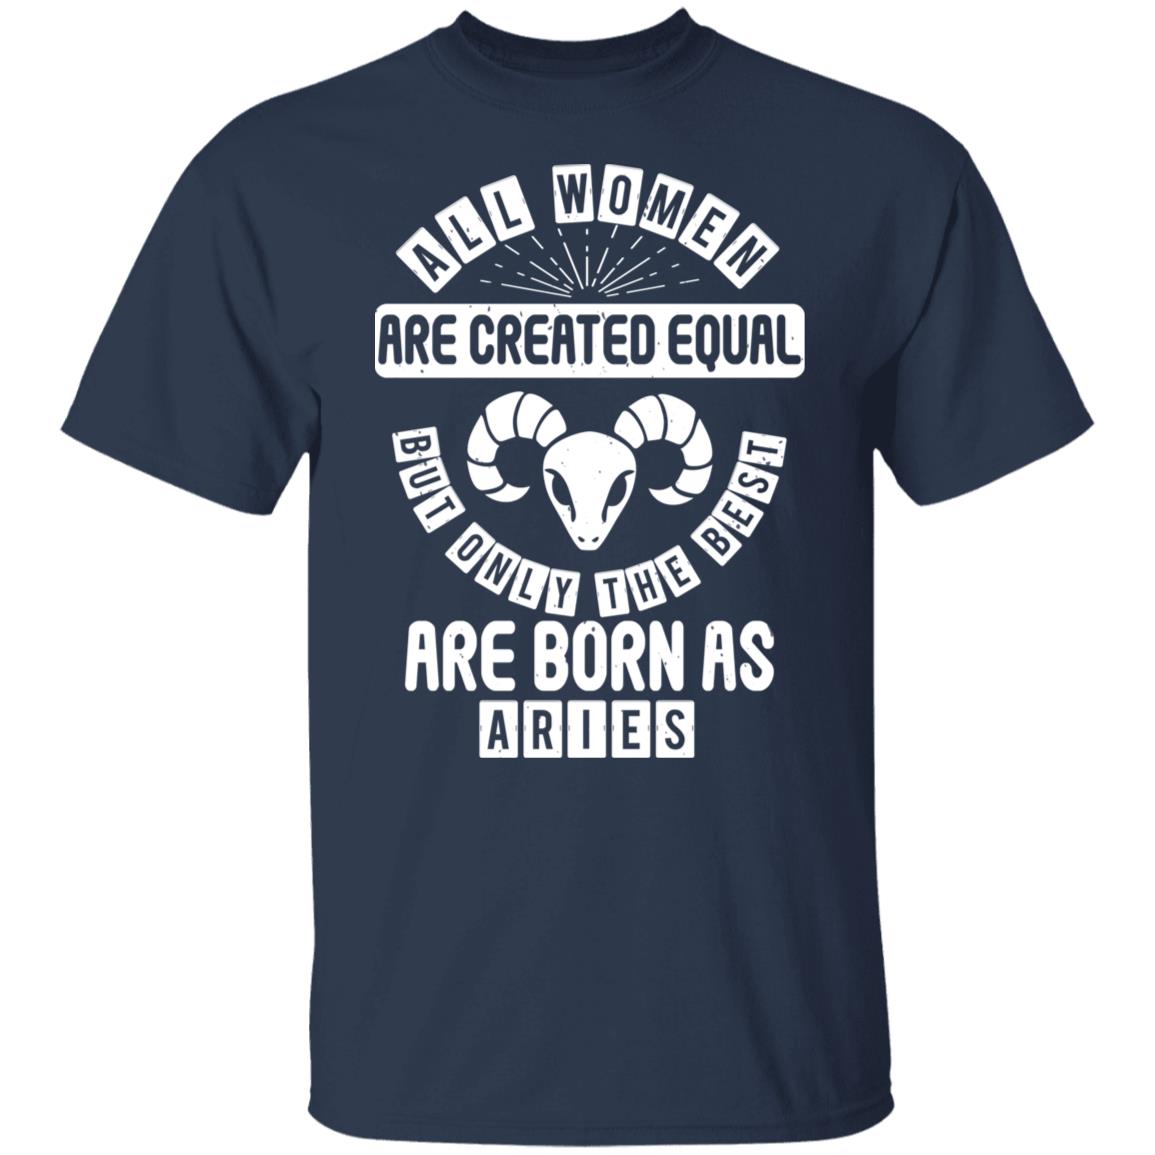 All Women Are Created Equal But Only The Best Are Born as Aries Birthday Gift Shirt